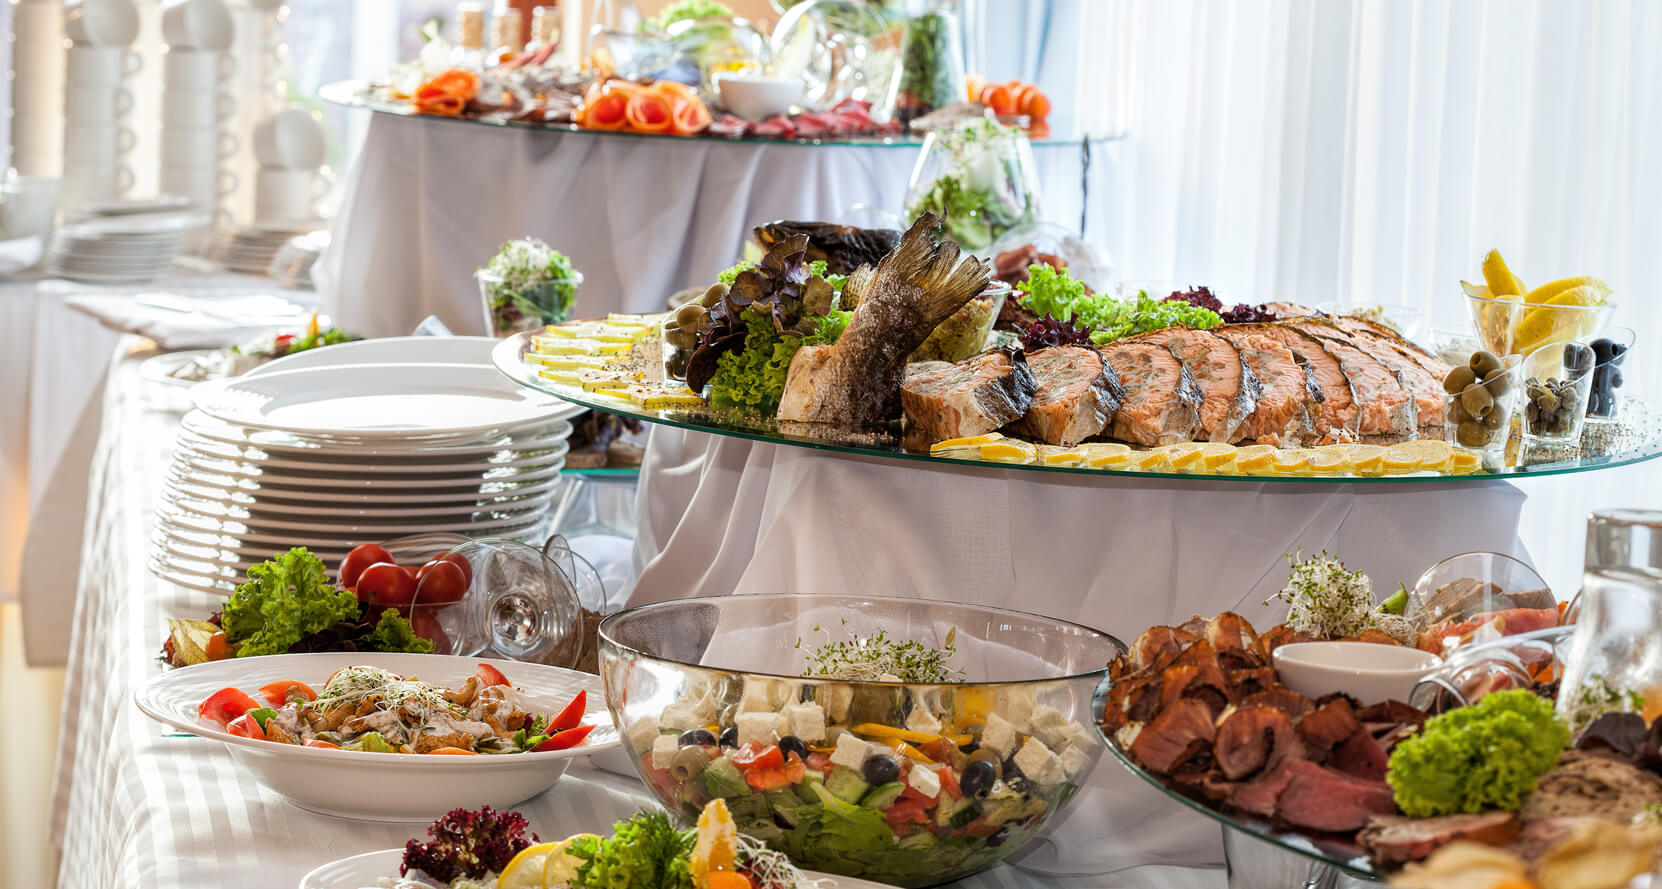 Buffet Dinner Packages - A Cappella Catering Co. | At your service